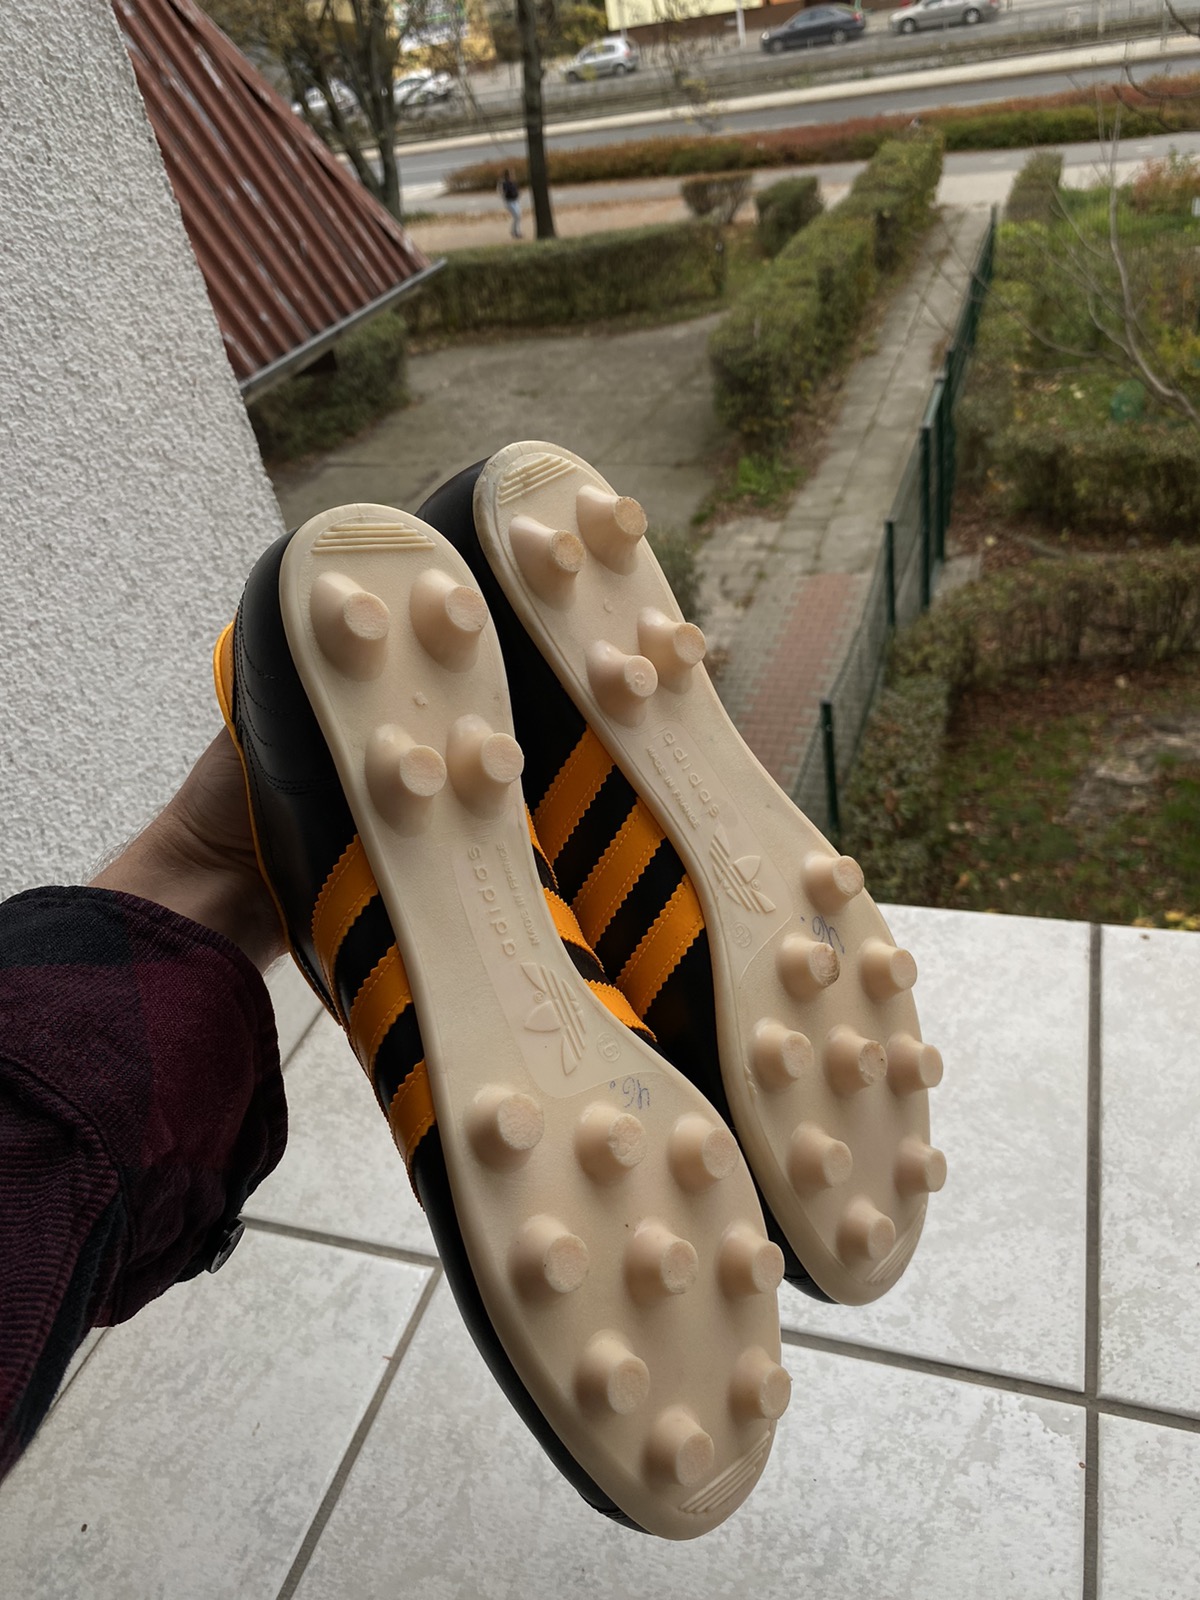 Adidas Kid made in France 70-80s football boots - 4